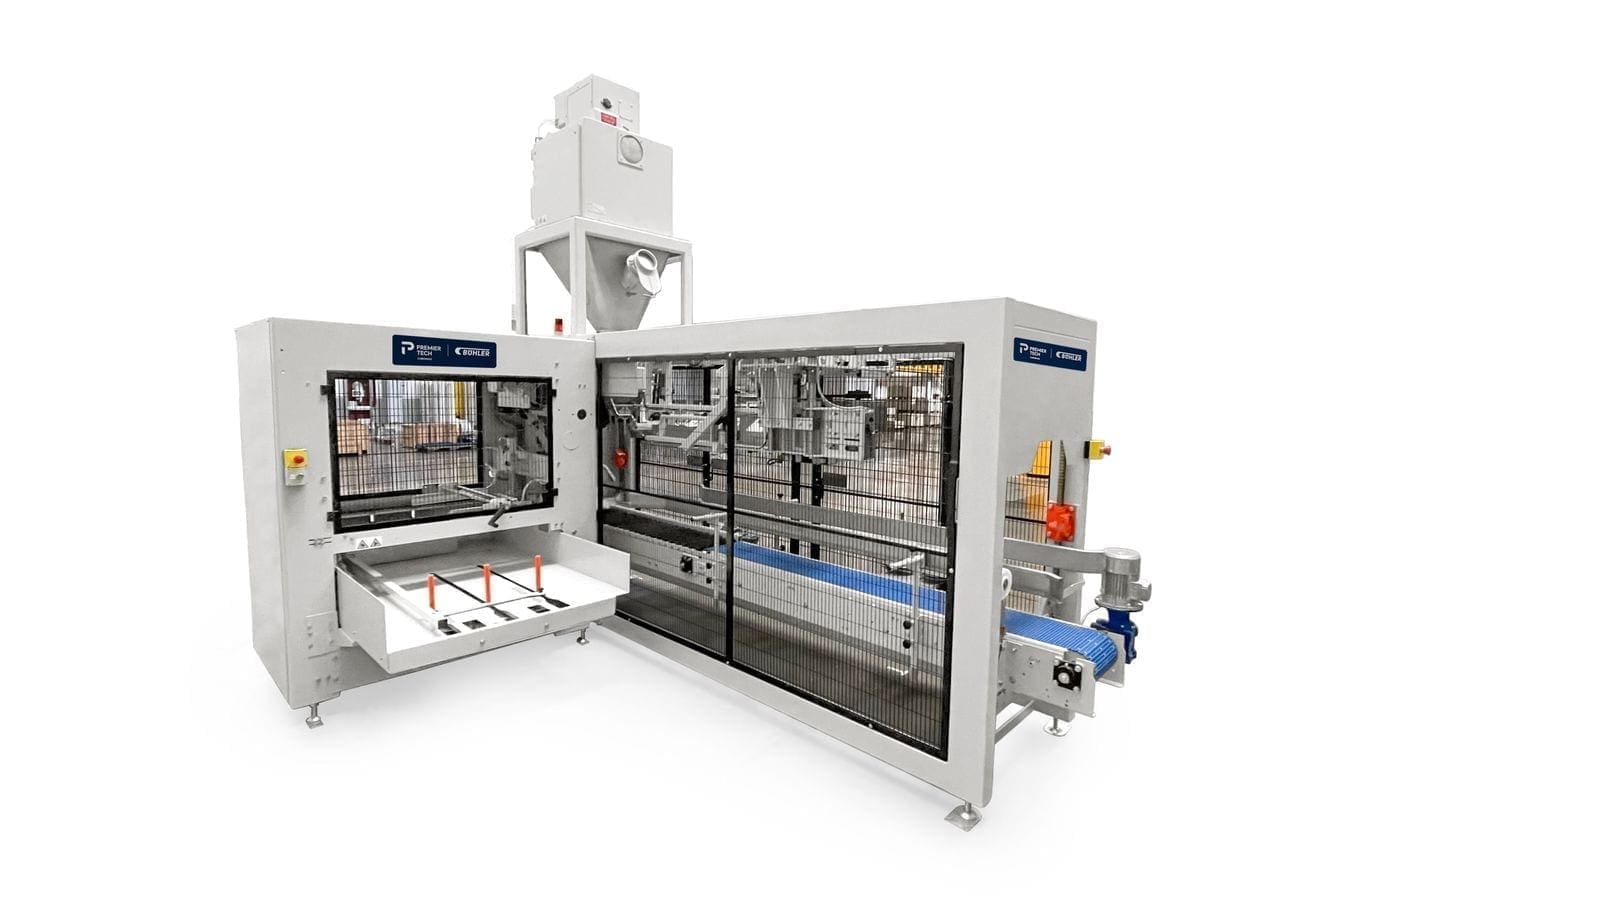 Bühler, Premier Tech partnership gives birth to a new series of fully automated packaging equipment for millers